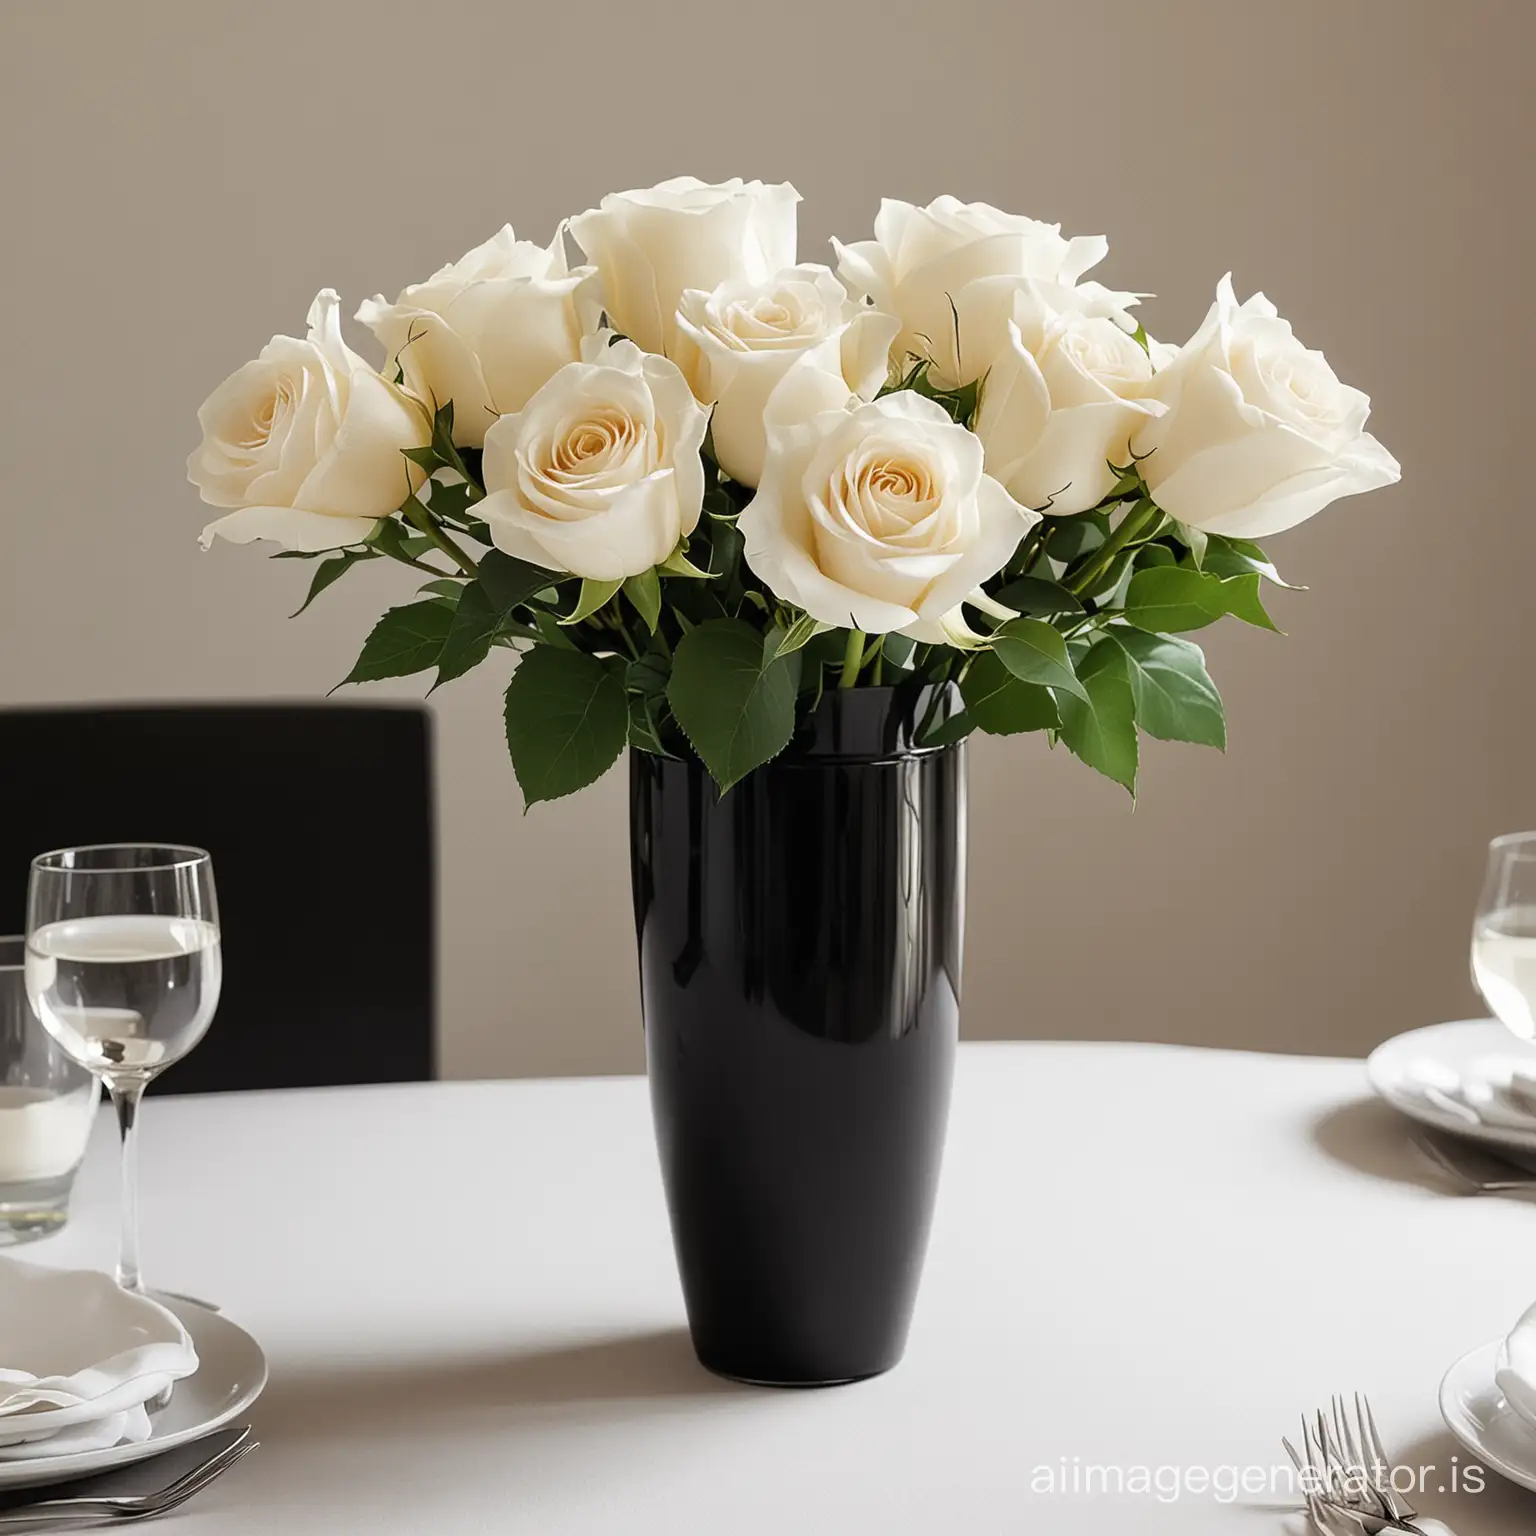 a n elegant and sleek black vase with simple white roses for a minimalist and elegant wedding centerpiece